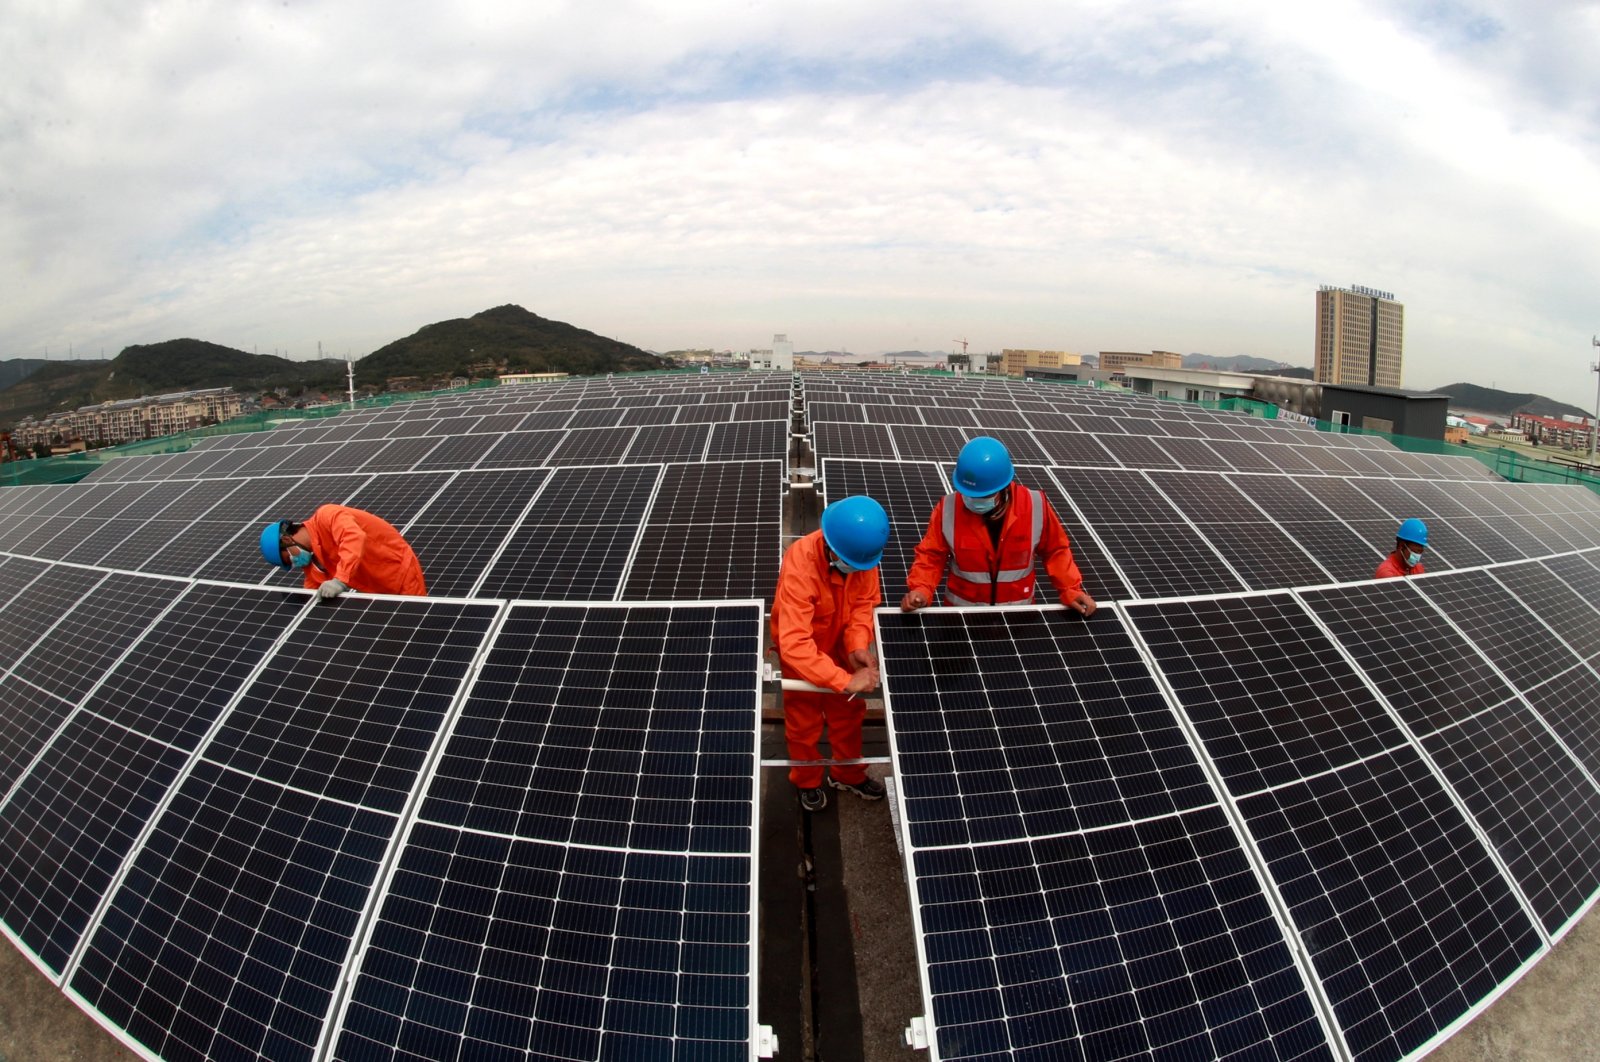 Workers install photovoltaic panels on the roof of a fish processing plant in Zhoushan, Zhejiang province, China, Nov. 16, 2021. (Photo by Getty Images)